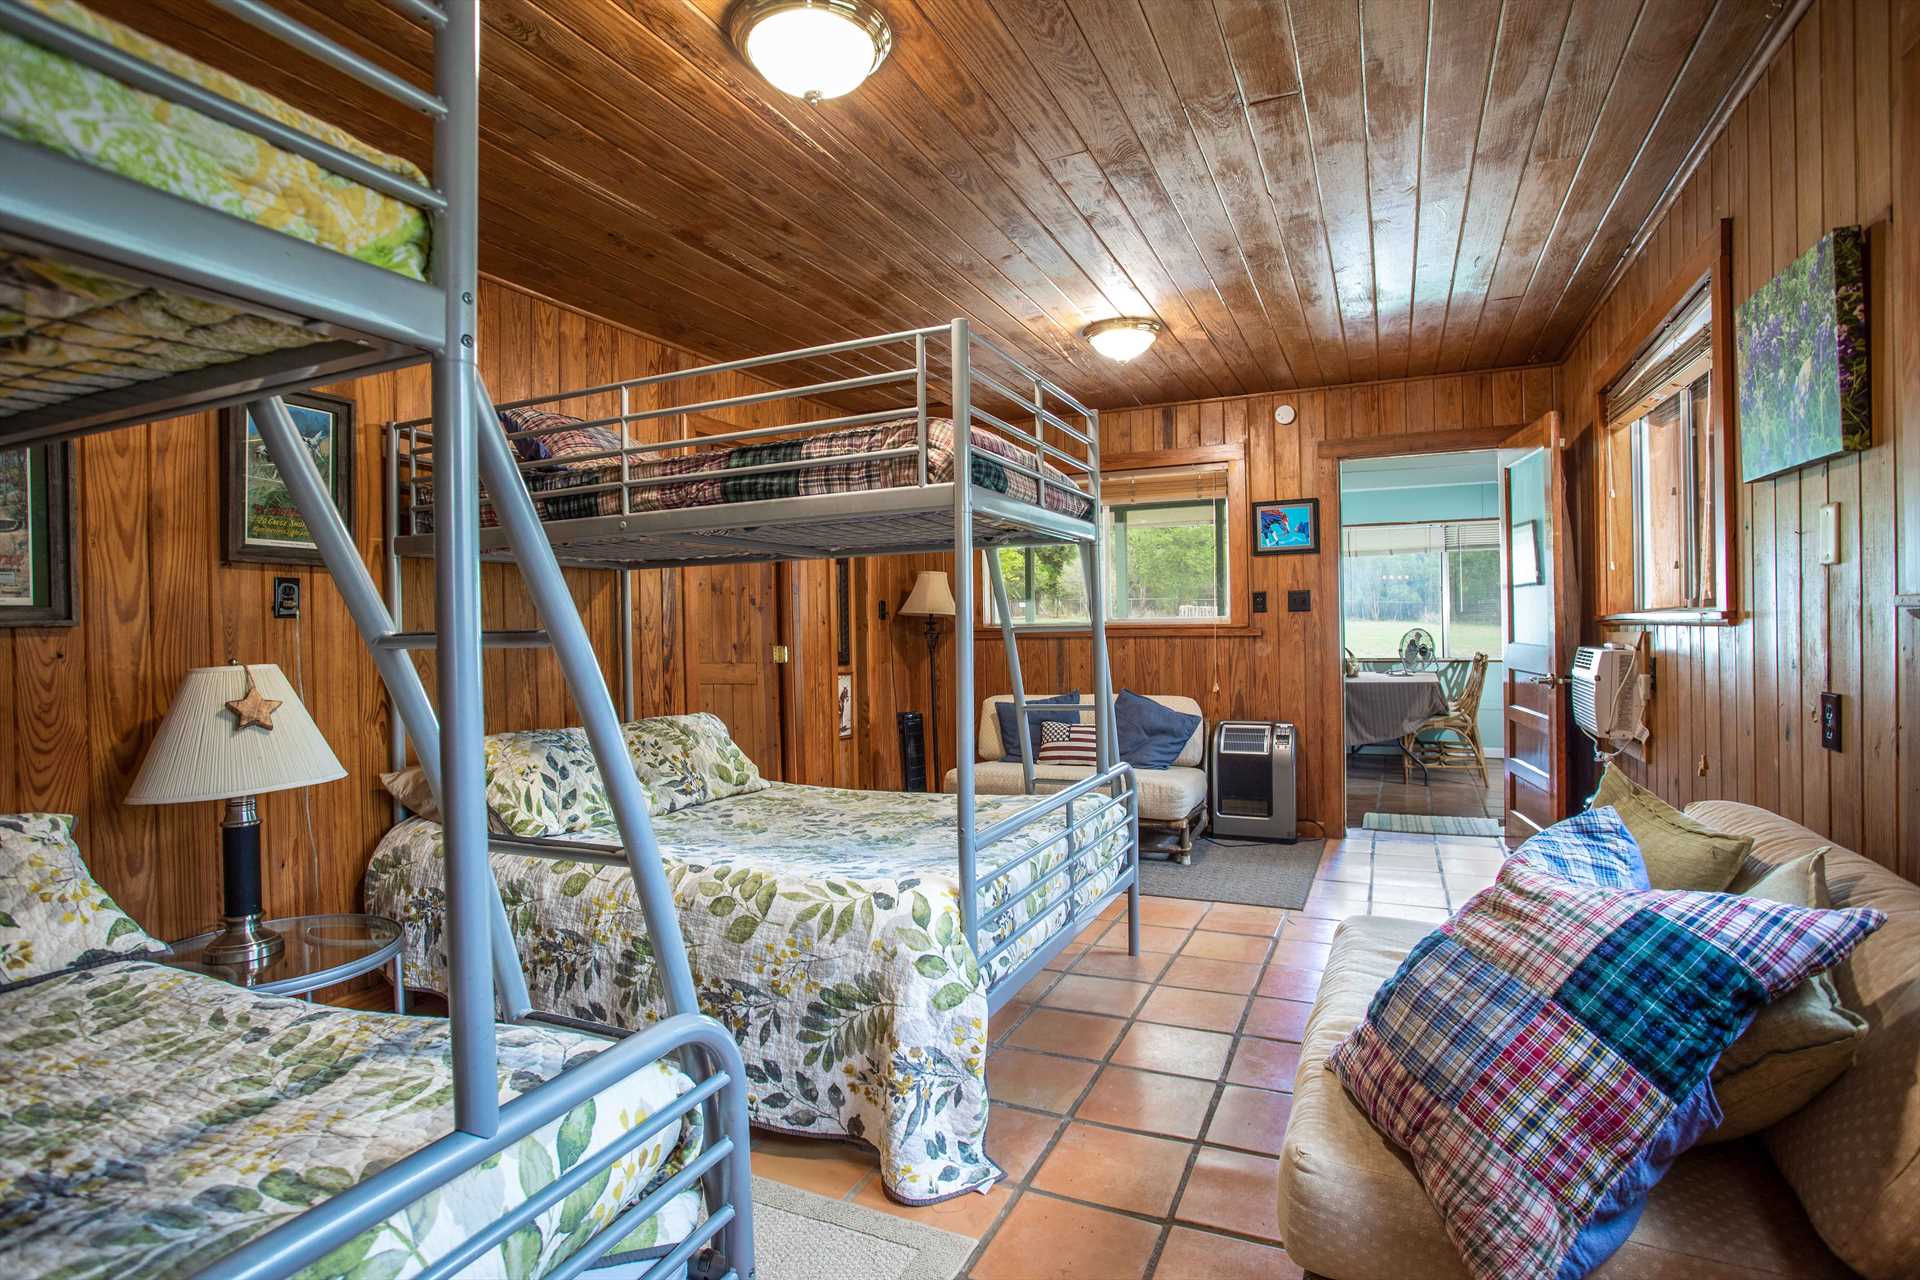                                                 Here's another good look at the twin bunk setups in the third bedroom, with room for up to six people to sleep comfortably.